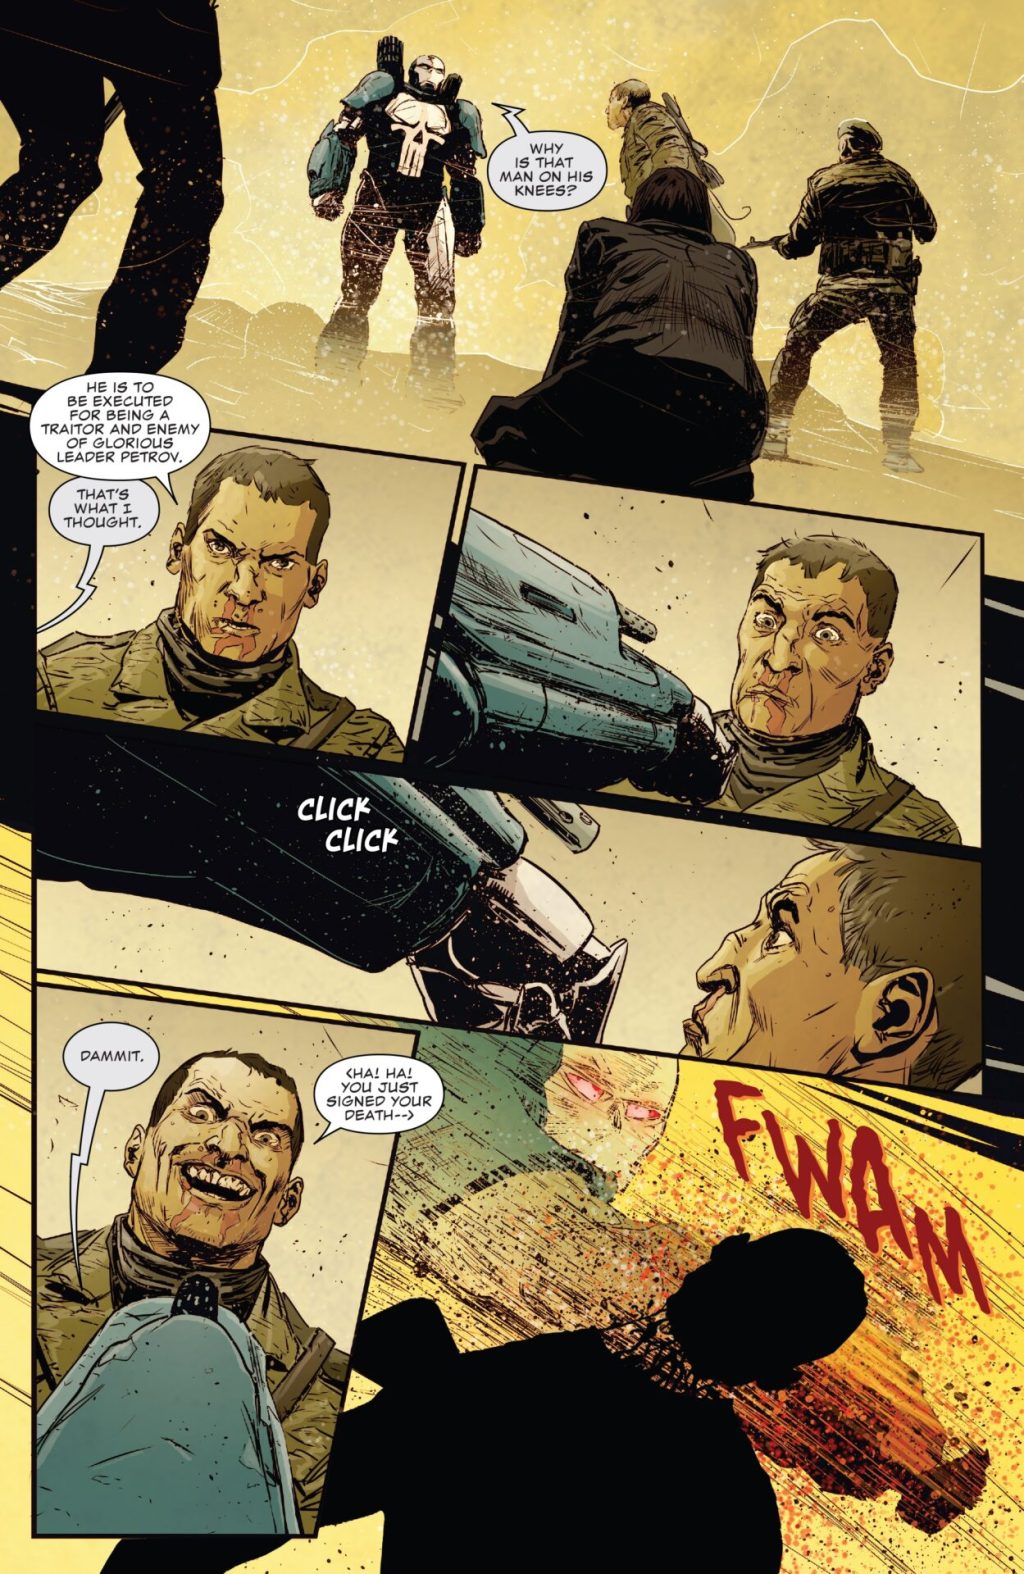 Frank Castle has no time for negotiations in Punisher Vol. 2 #219 "Punisher: War Machine - Part Two" (2017), Marvel Comics. Words by Matthew Rosenberg, art by Guiu Vilanova and Lee Loughridge.